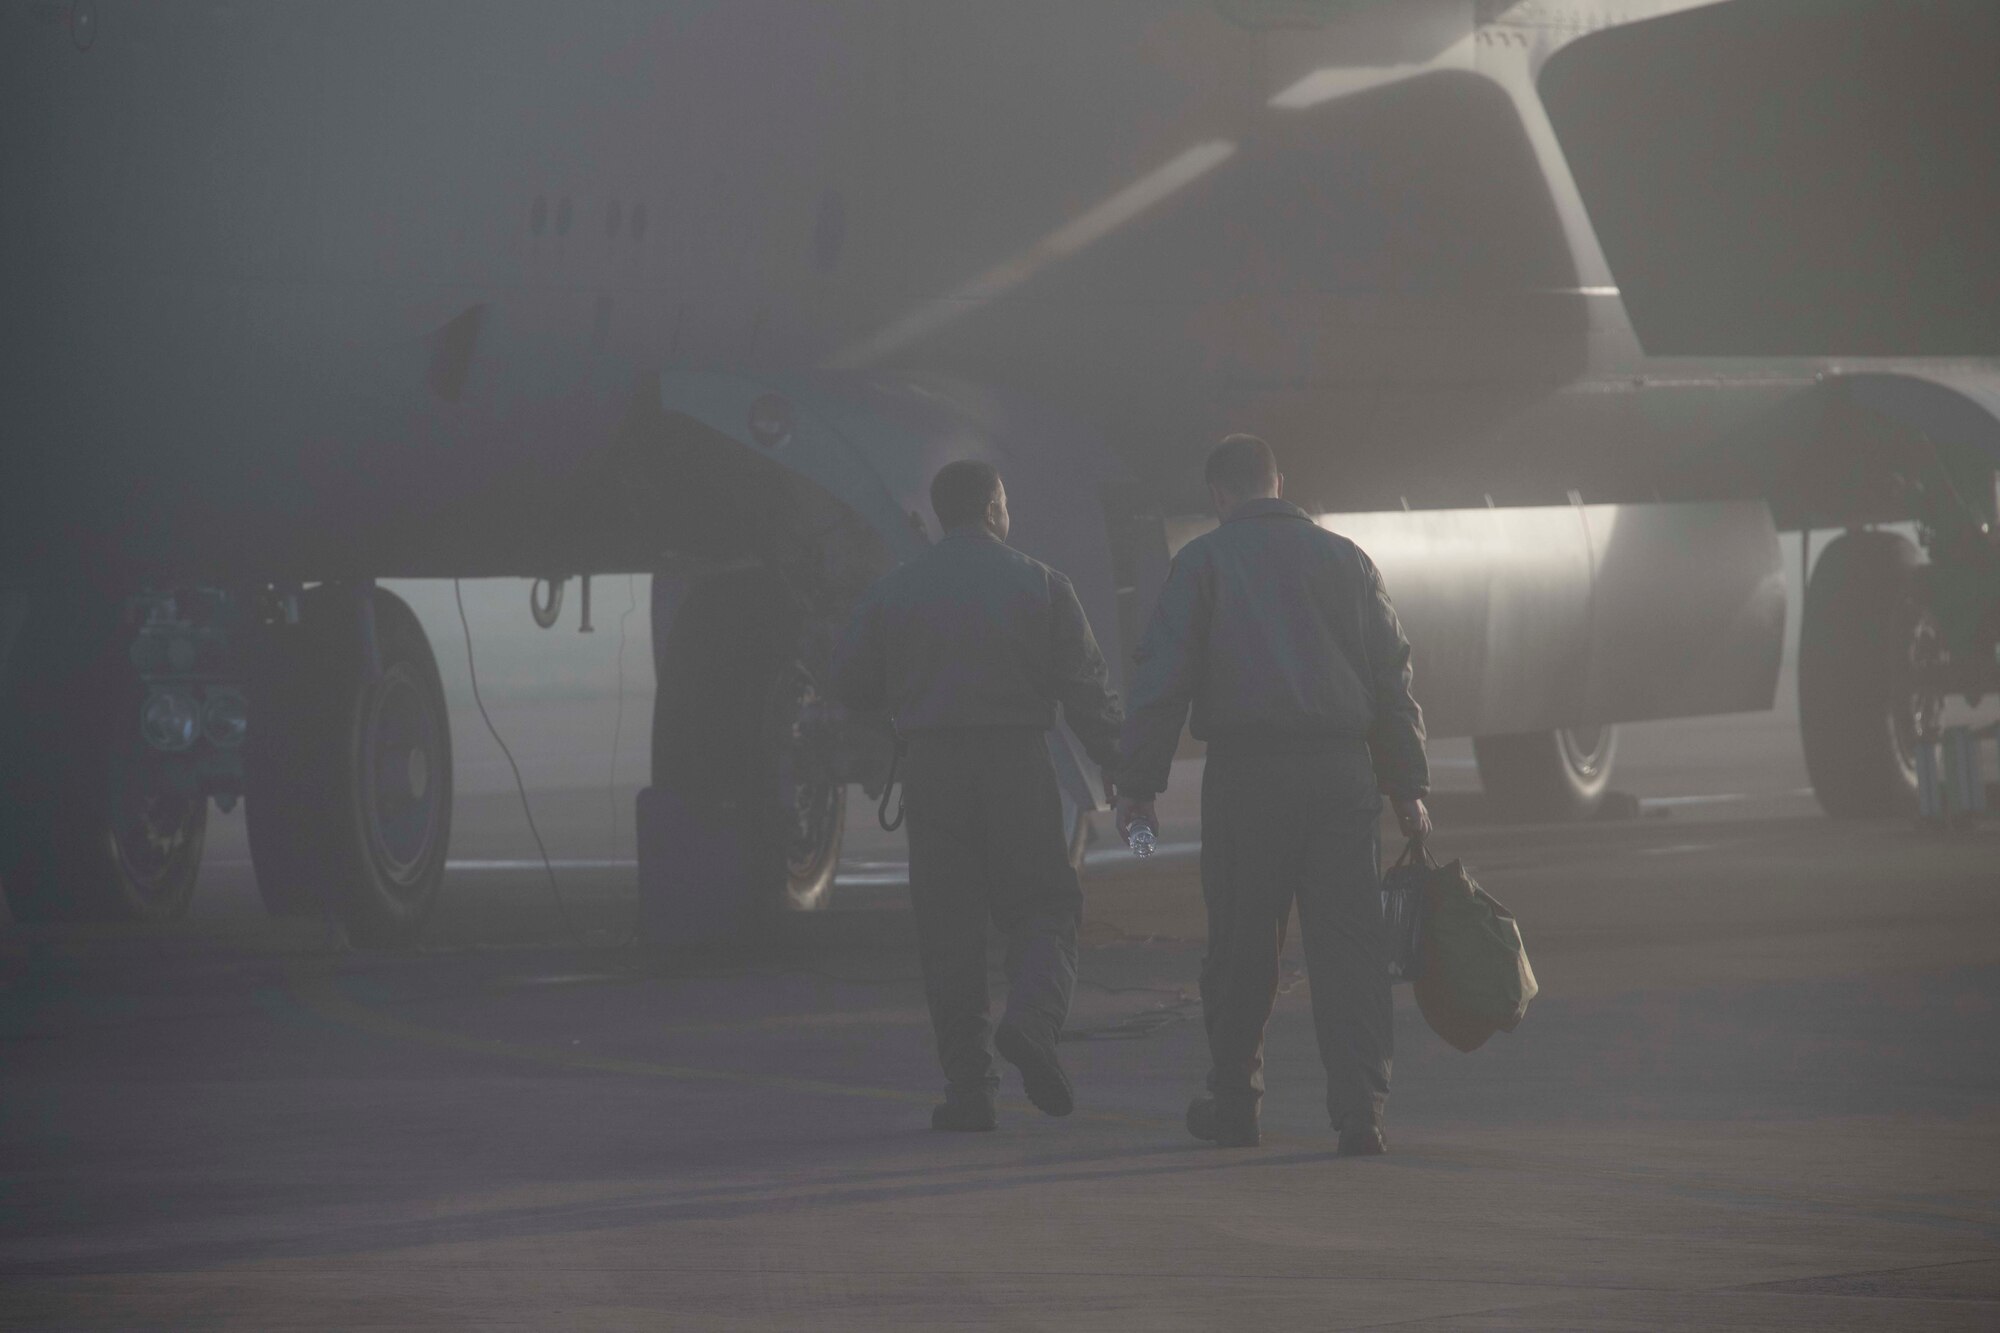 Early morning fog gripped the flight line at RAF Fairford, England, Sept. 13, 2018.  The morning sun burned off the worst of it, enabling the 343rd Expeditionary Bomb Squadron to launch sorties for its bomber task force mission and for Ample Strike 18. (U.S. Air Force photo by Master Sgt. Ted Daigle)